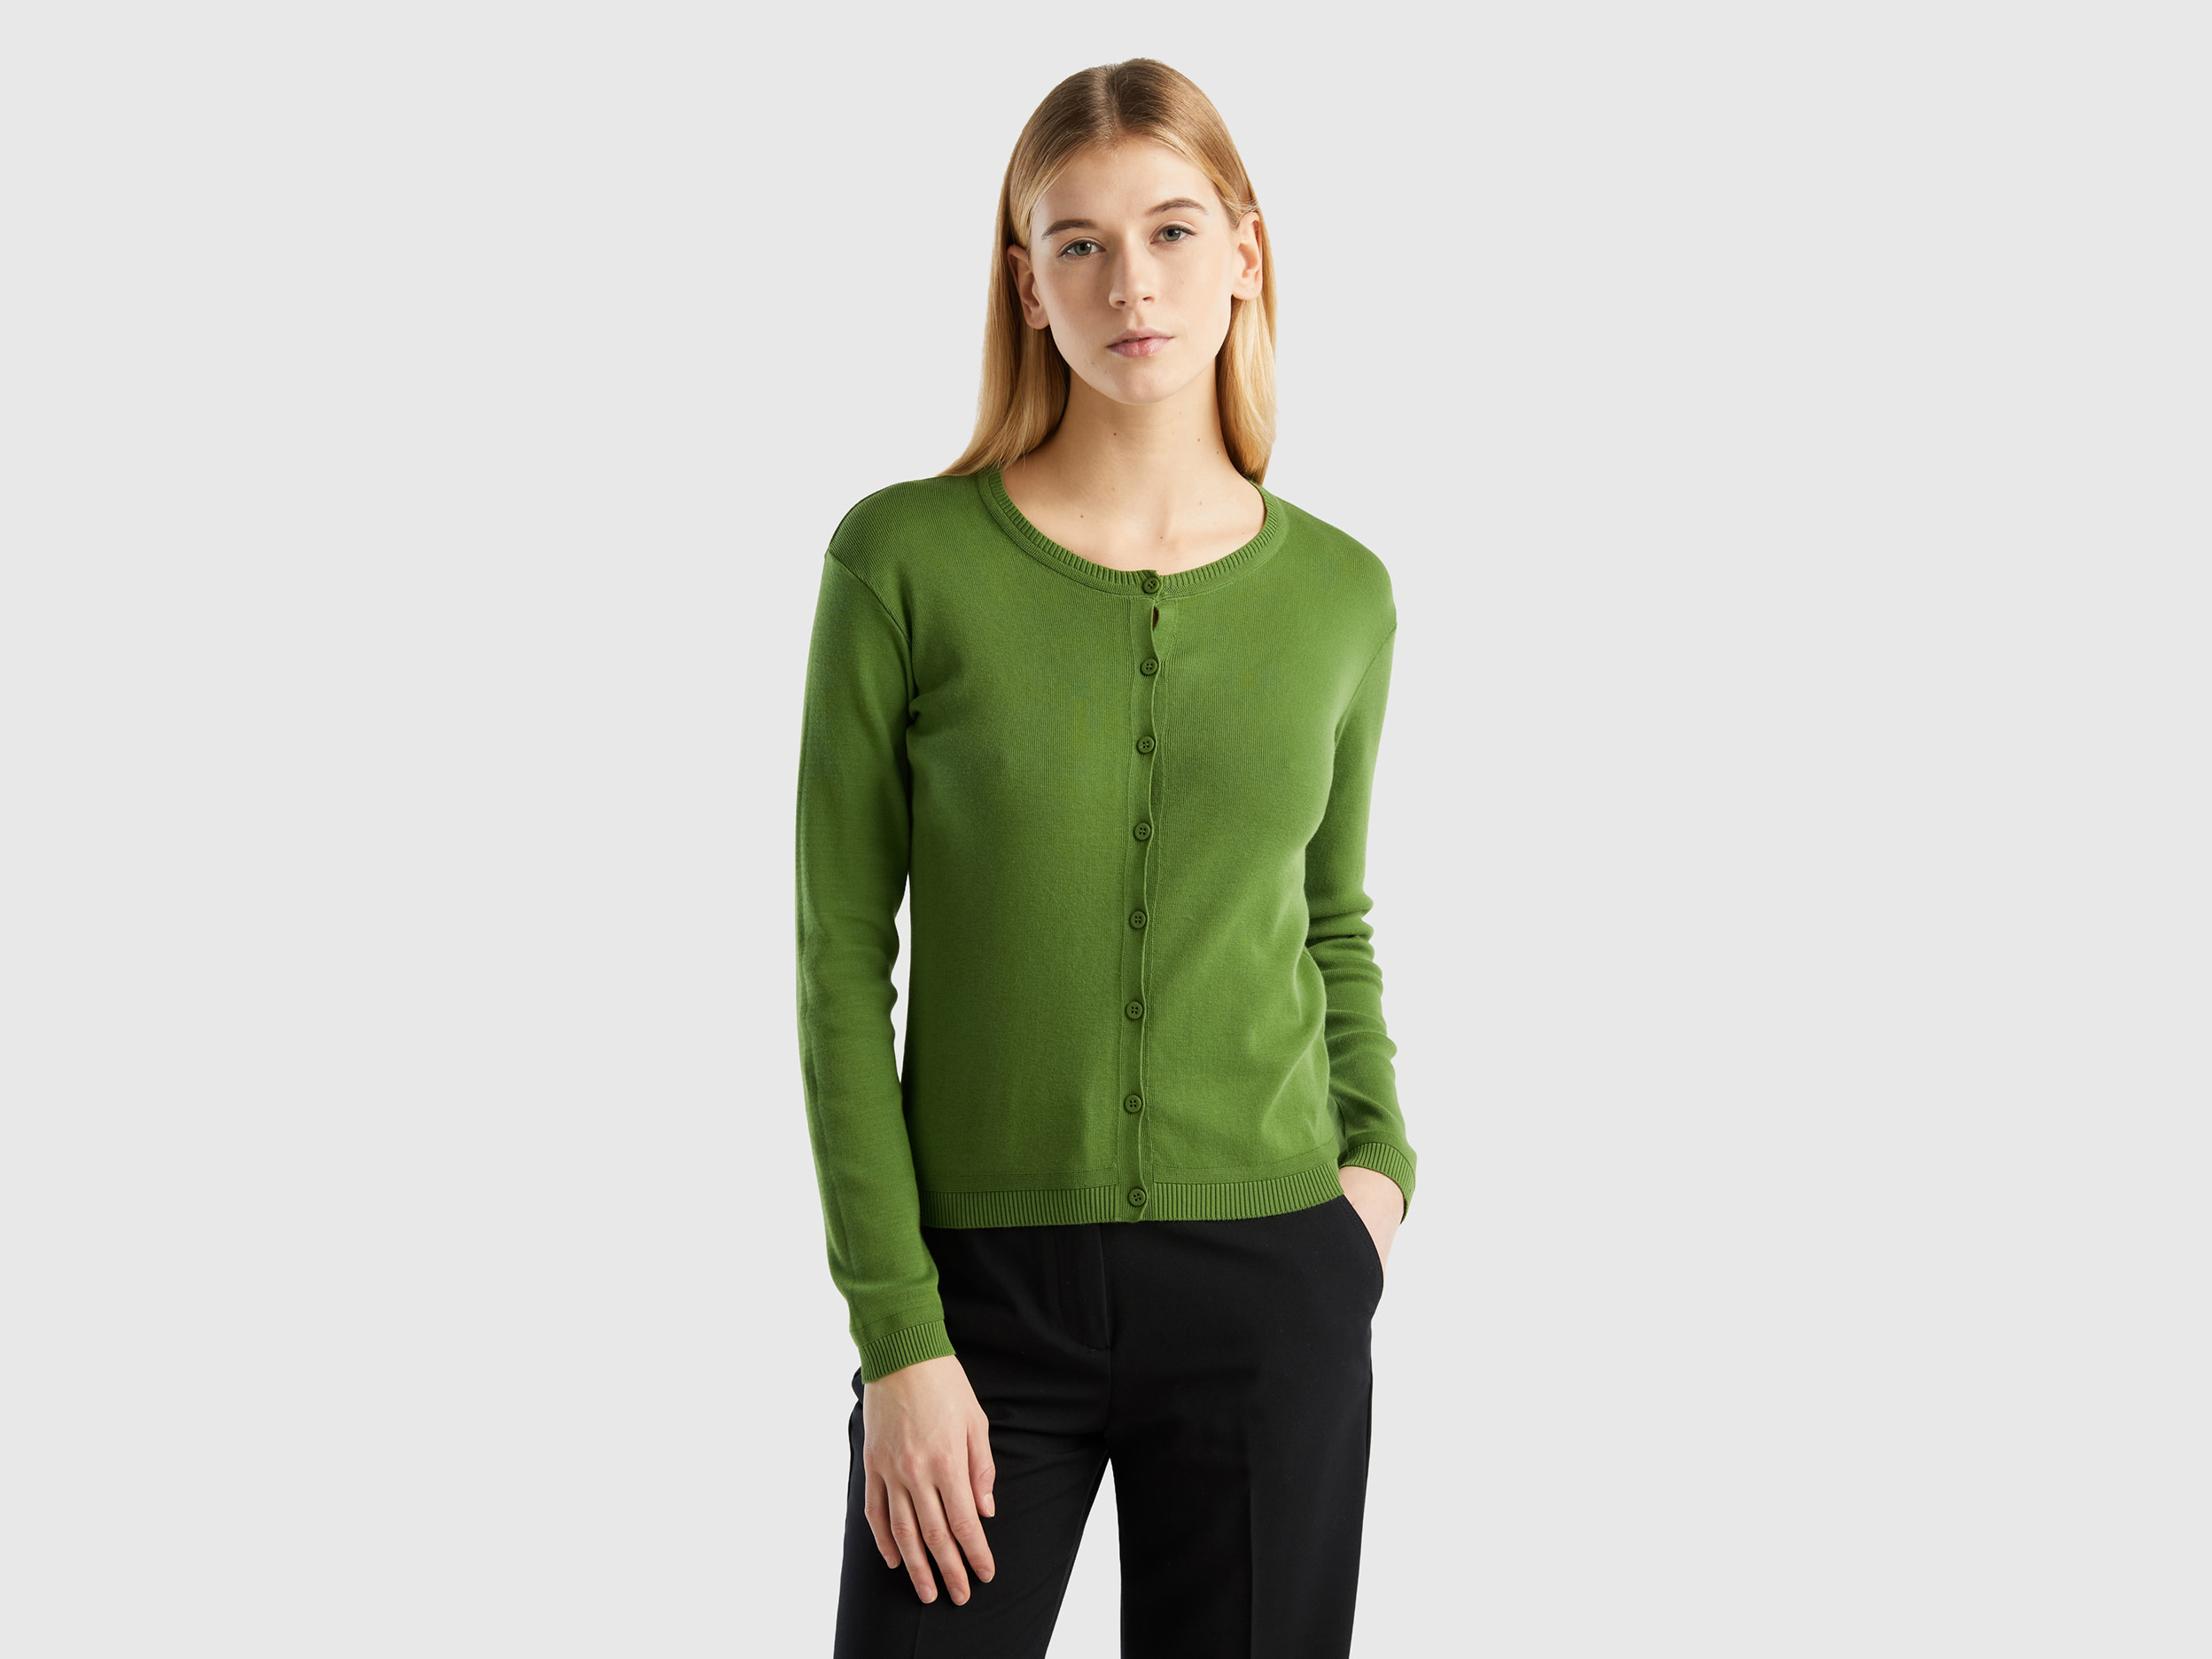 Benetton, Crew Neck Cardigan In Pure Cotton, size S, Military Green, Women